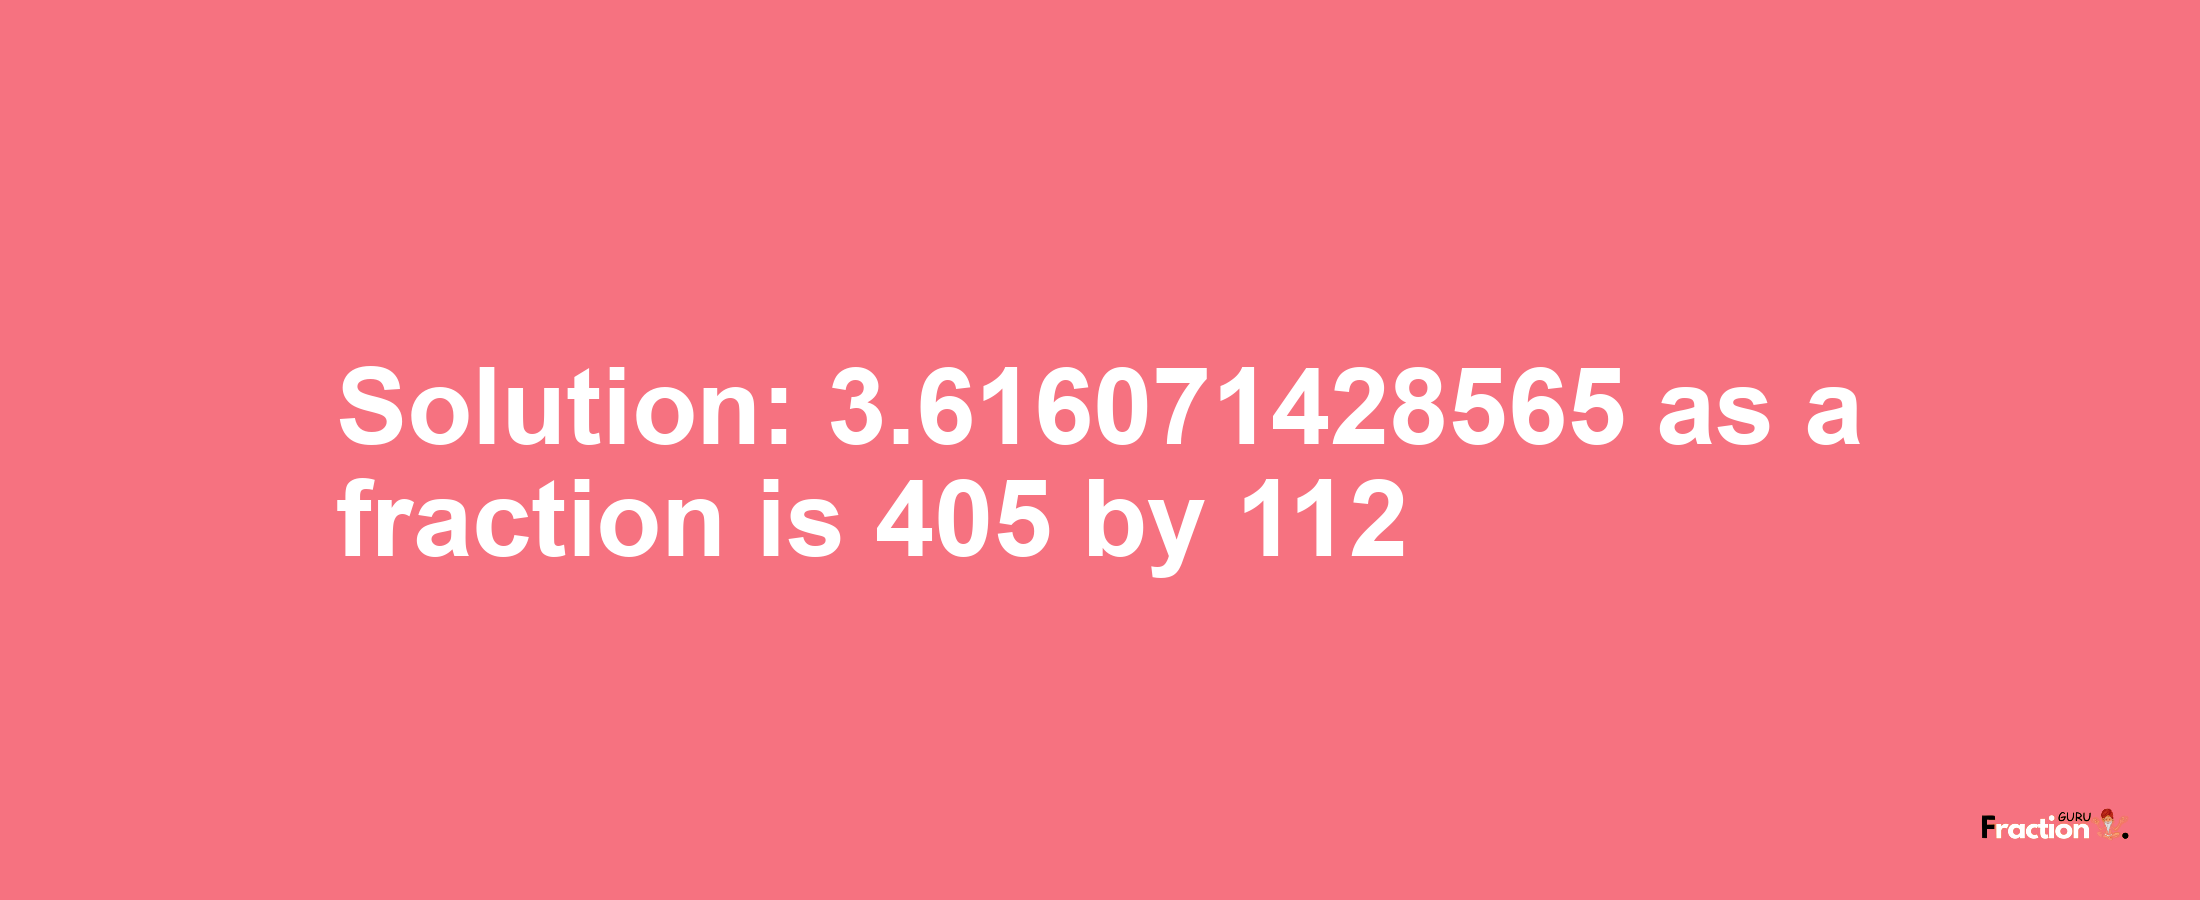 Solution:3.616071428565 as a fraction is 405/112